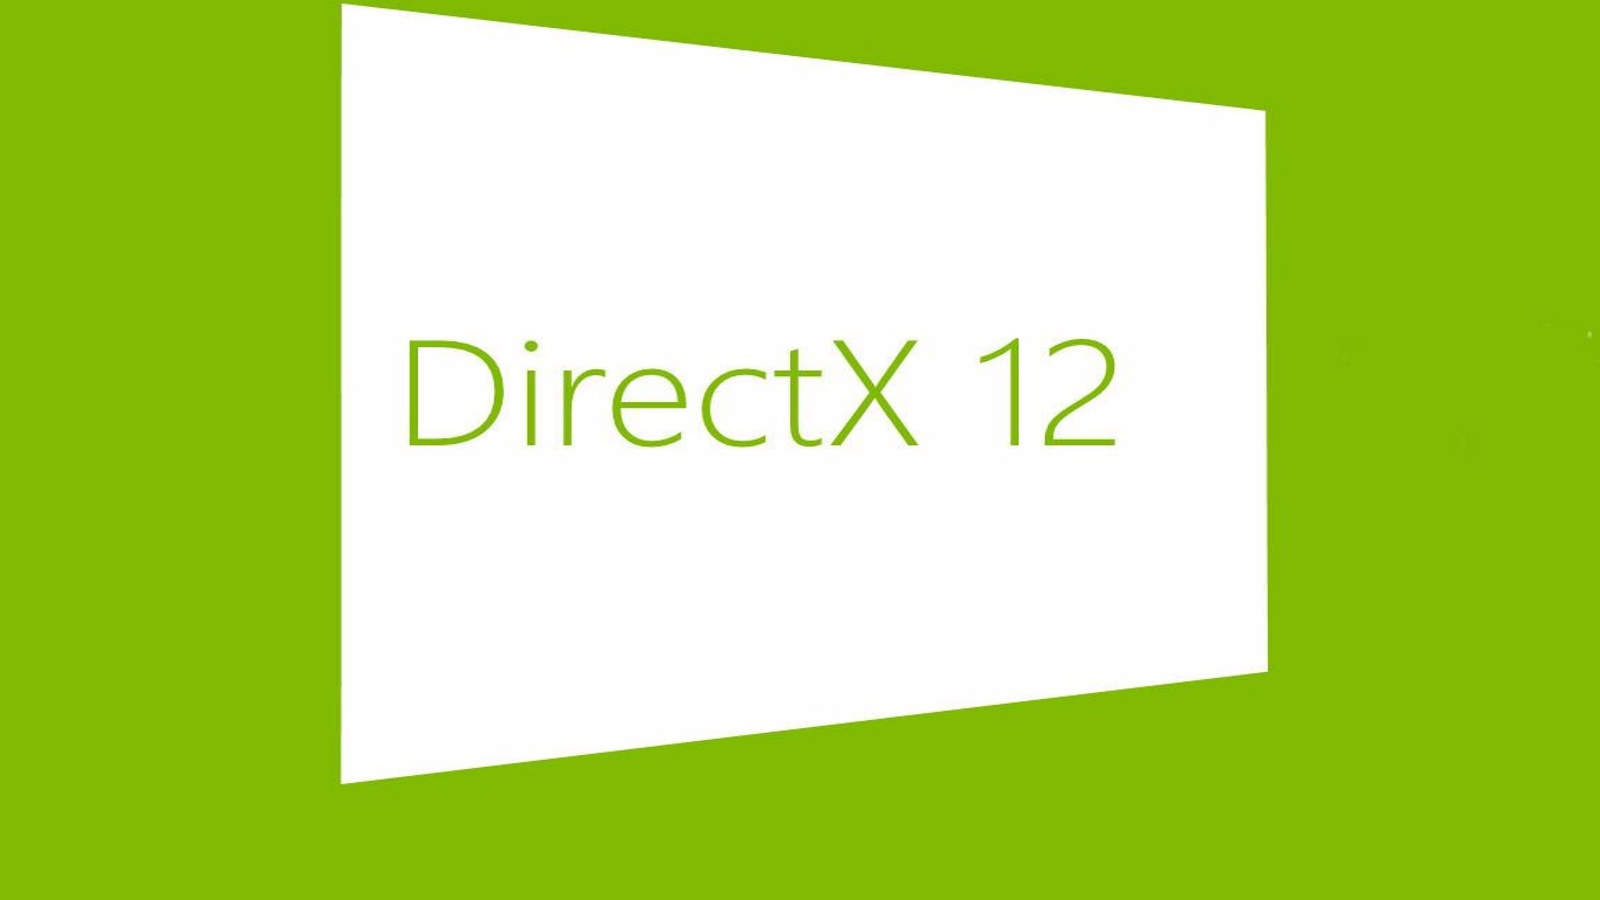 Intel is shutting down DirectX 12 support for some older processors